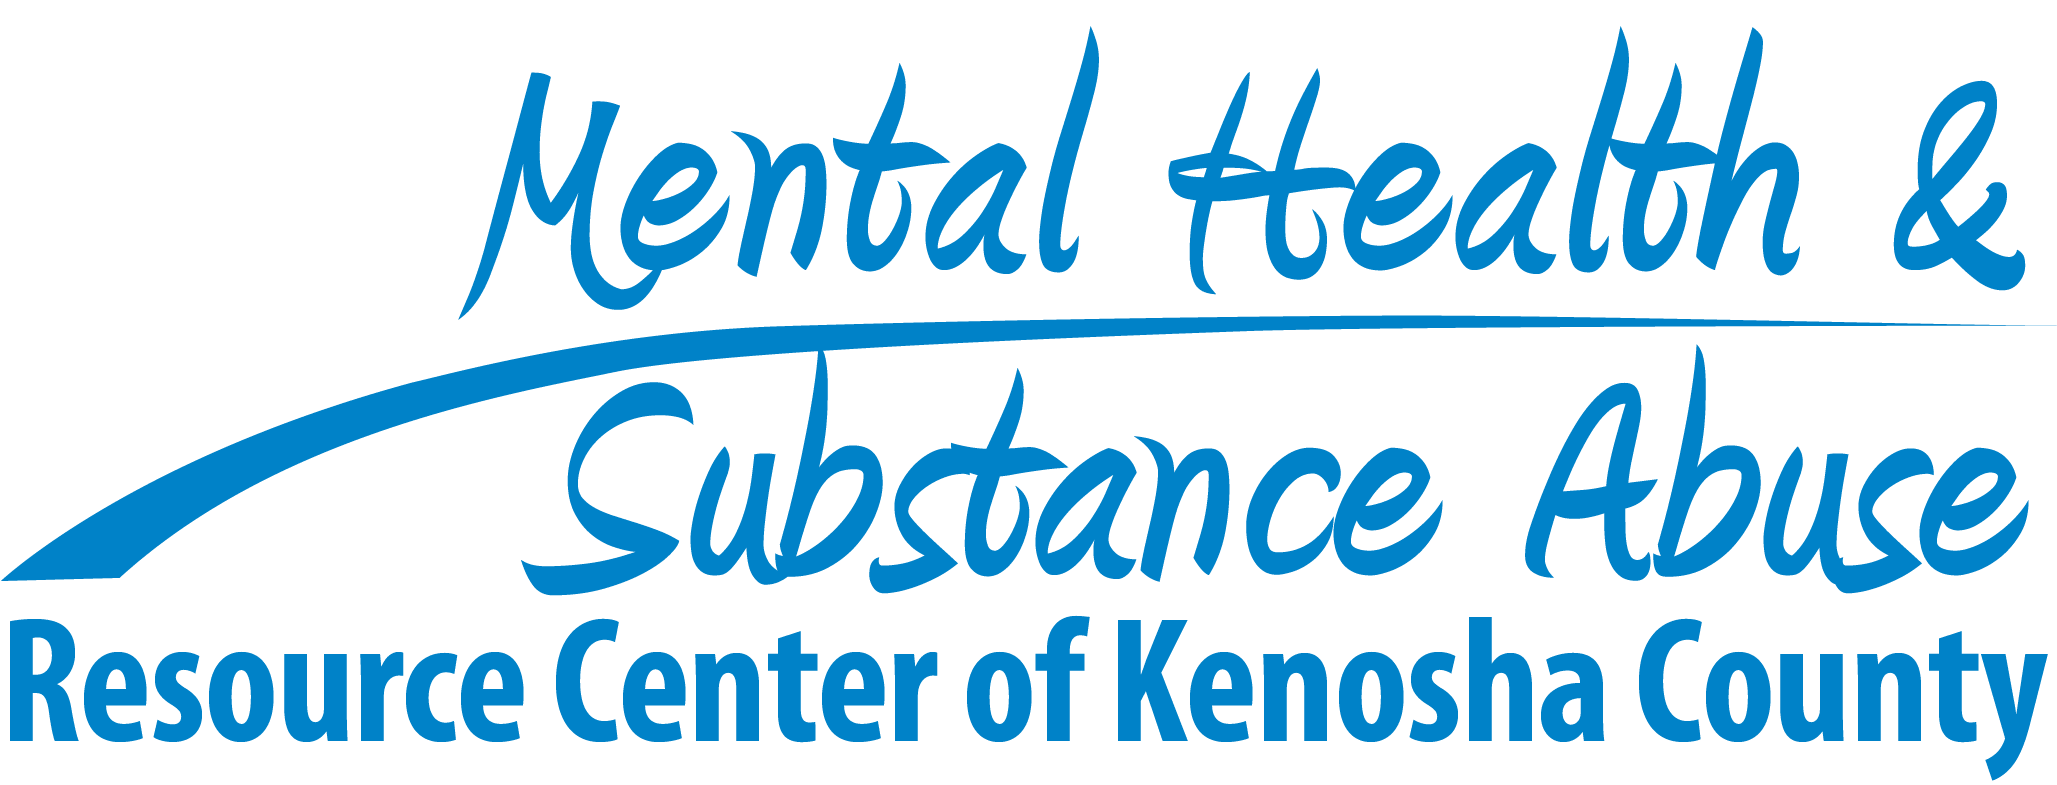 Mental Health and Substance Abuse Resource Center of Kenosha County